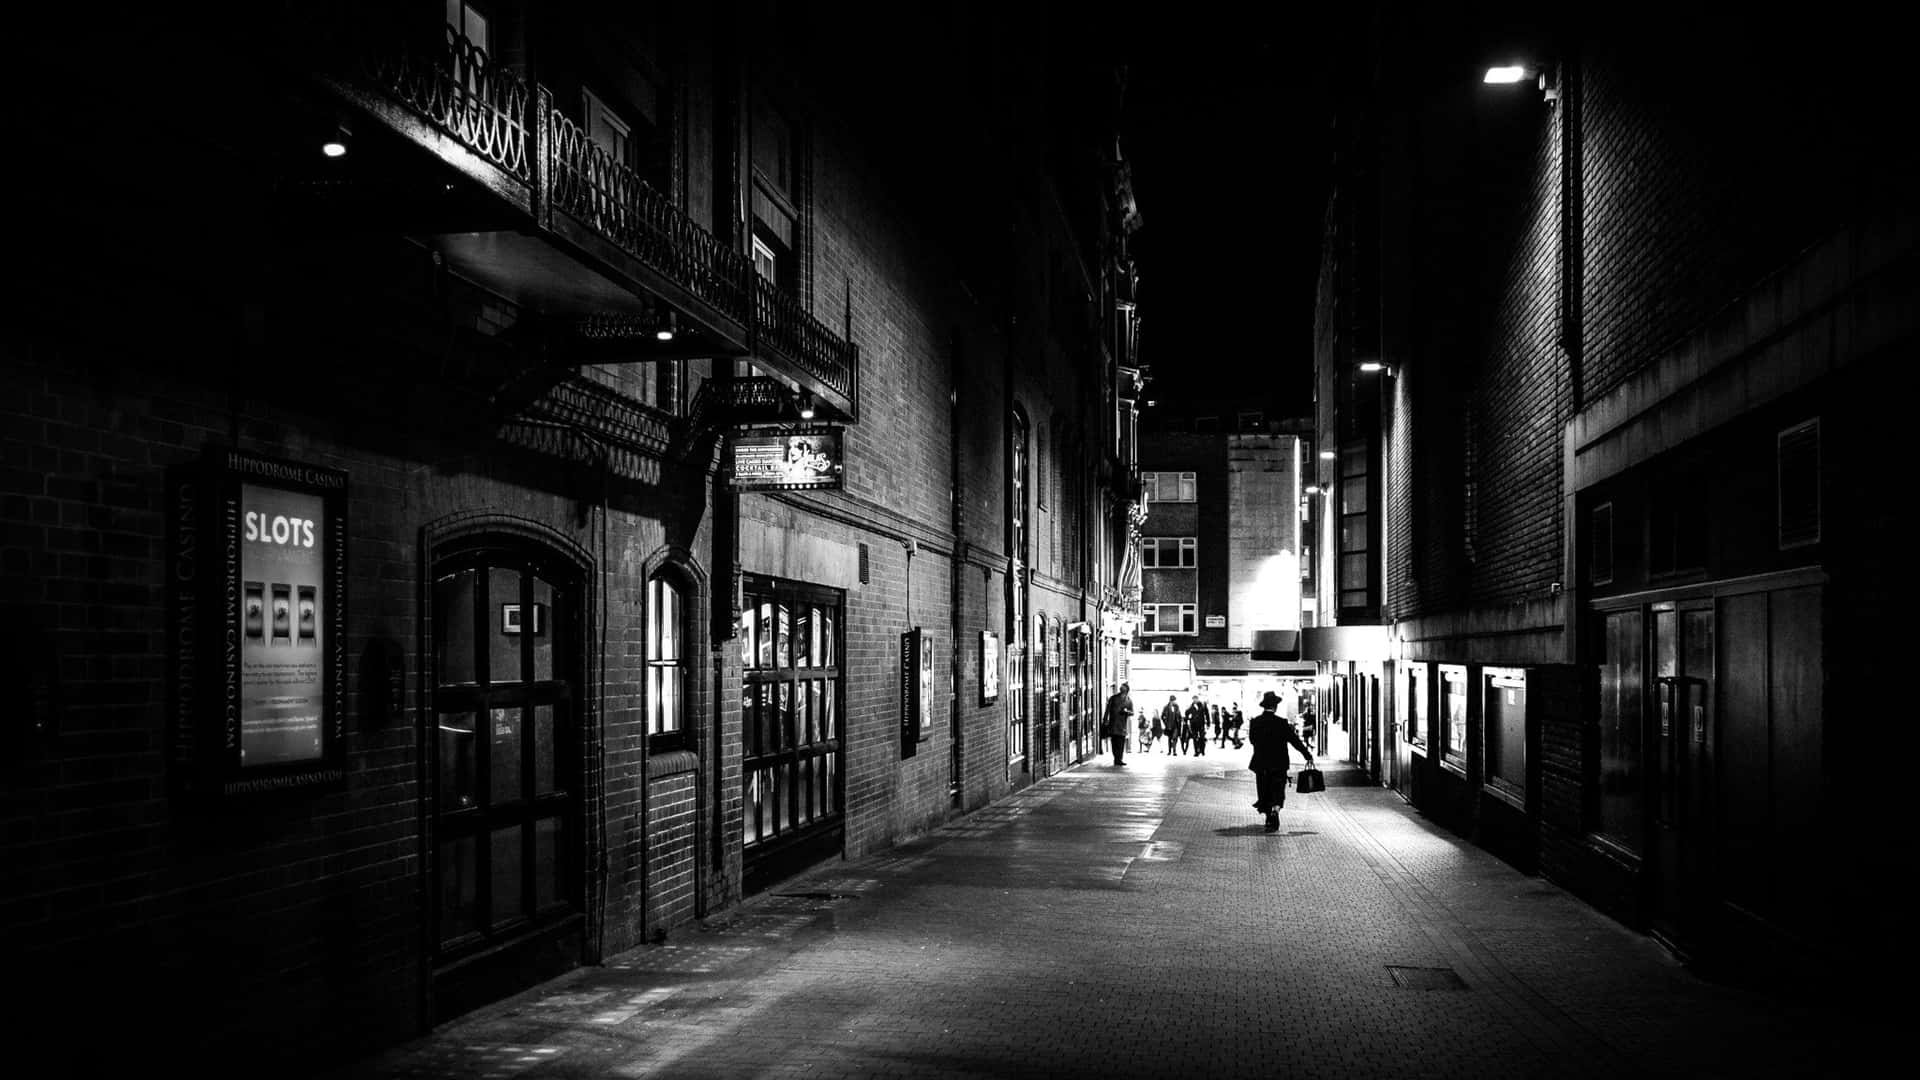 A captivating scene of a black and white street in an urban setting Wallpaper